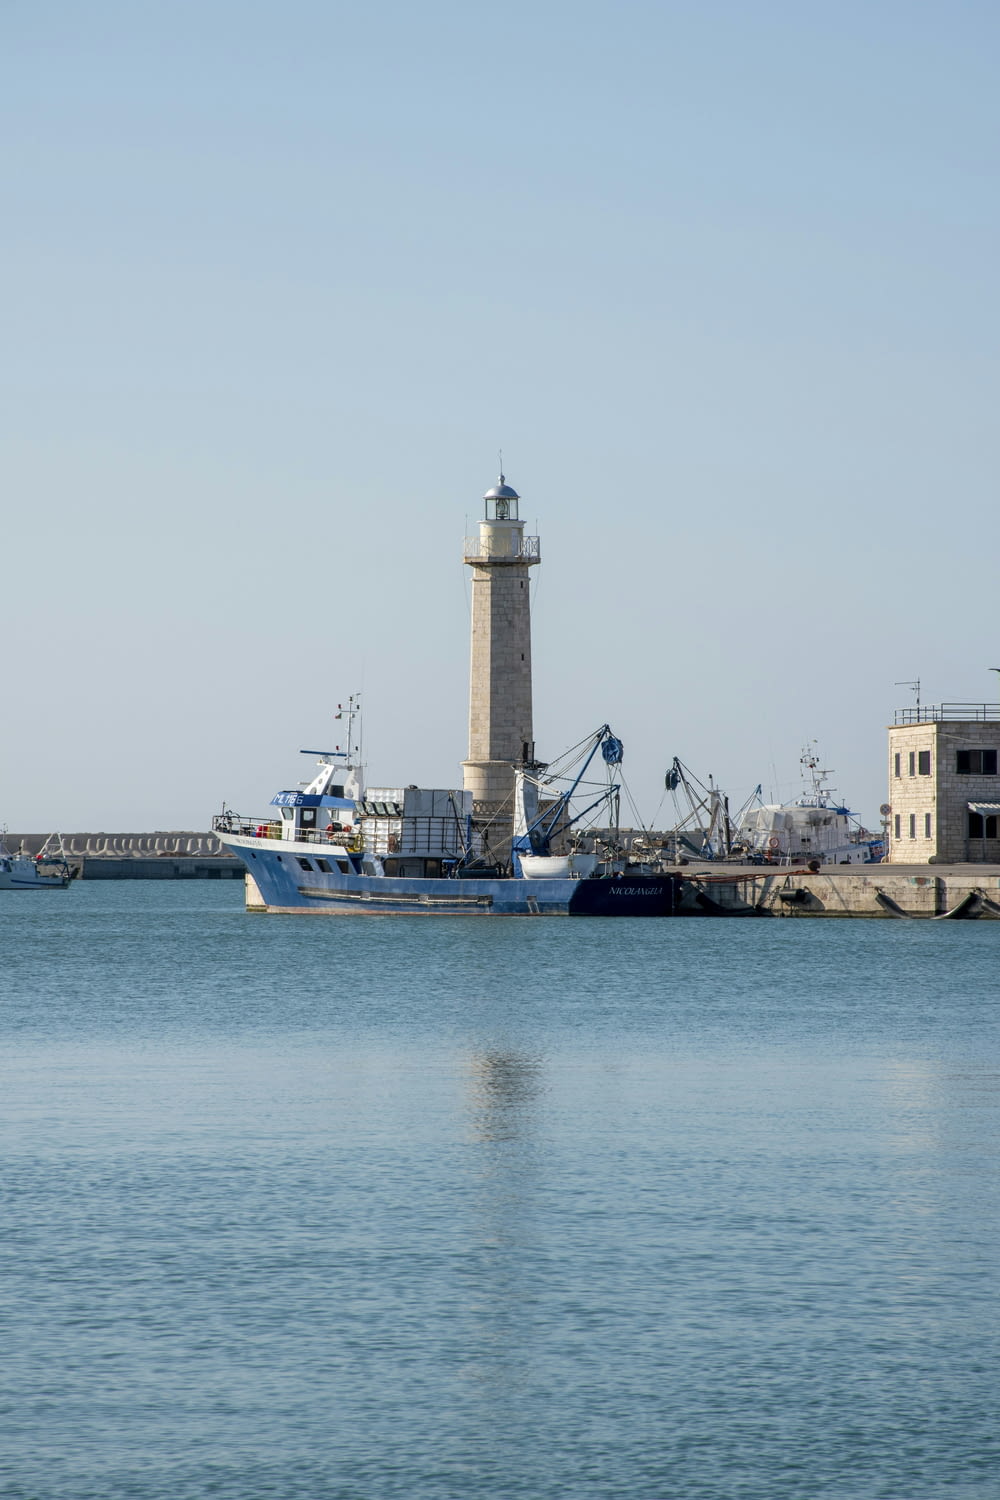 a large body of water with a light house in the background